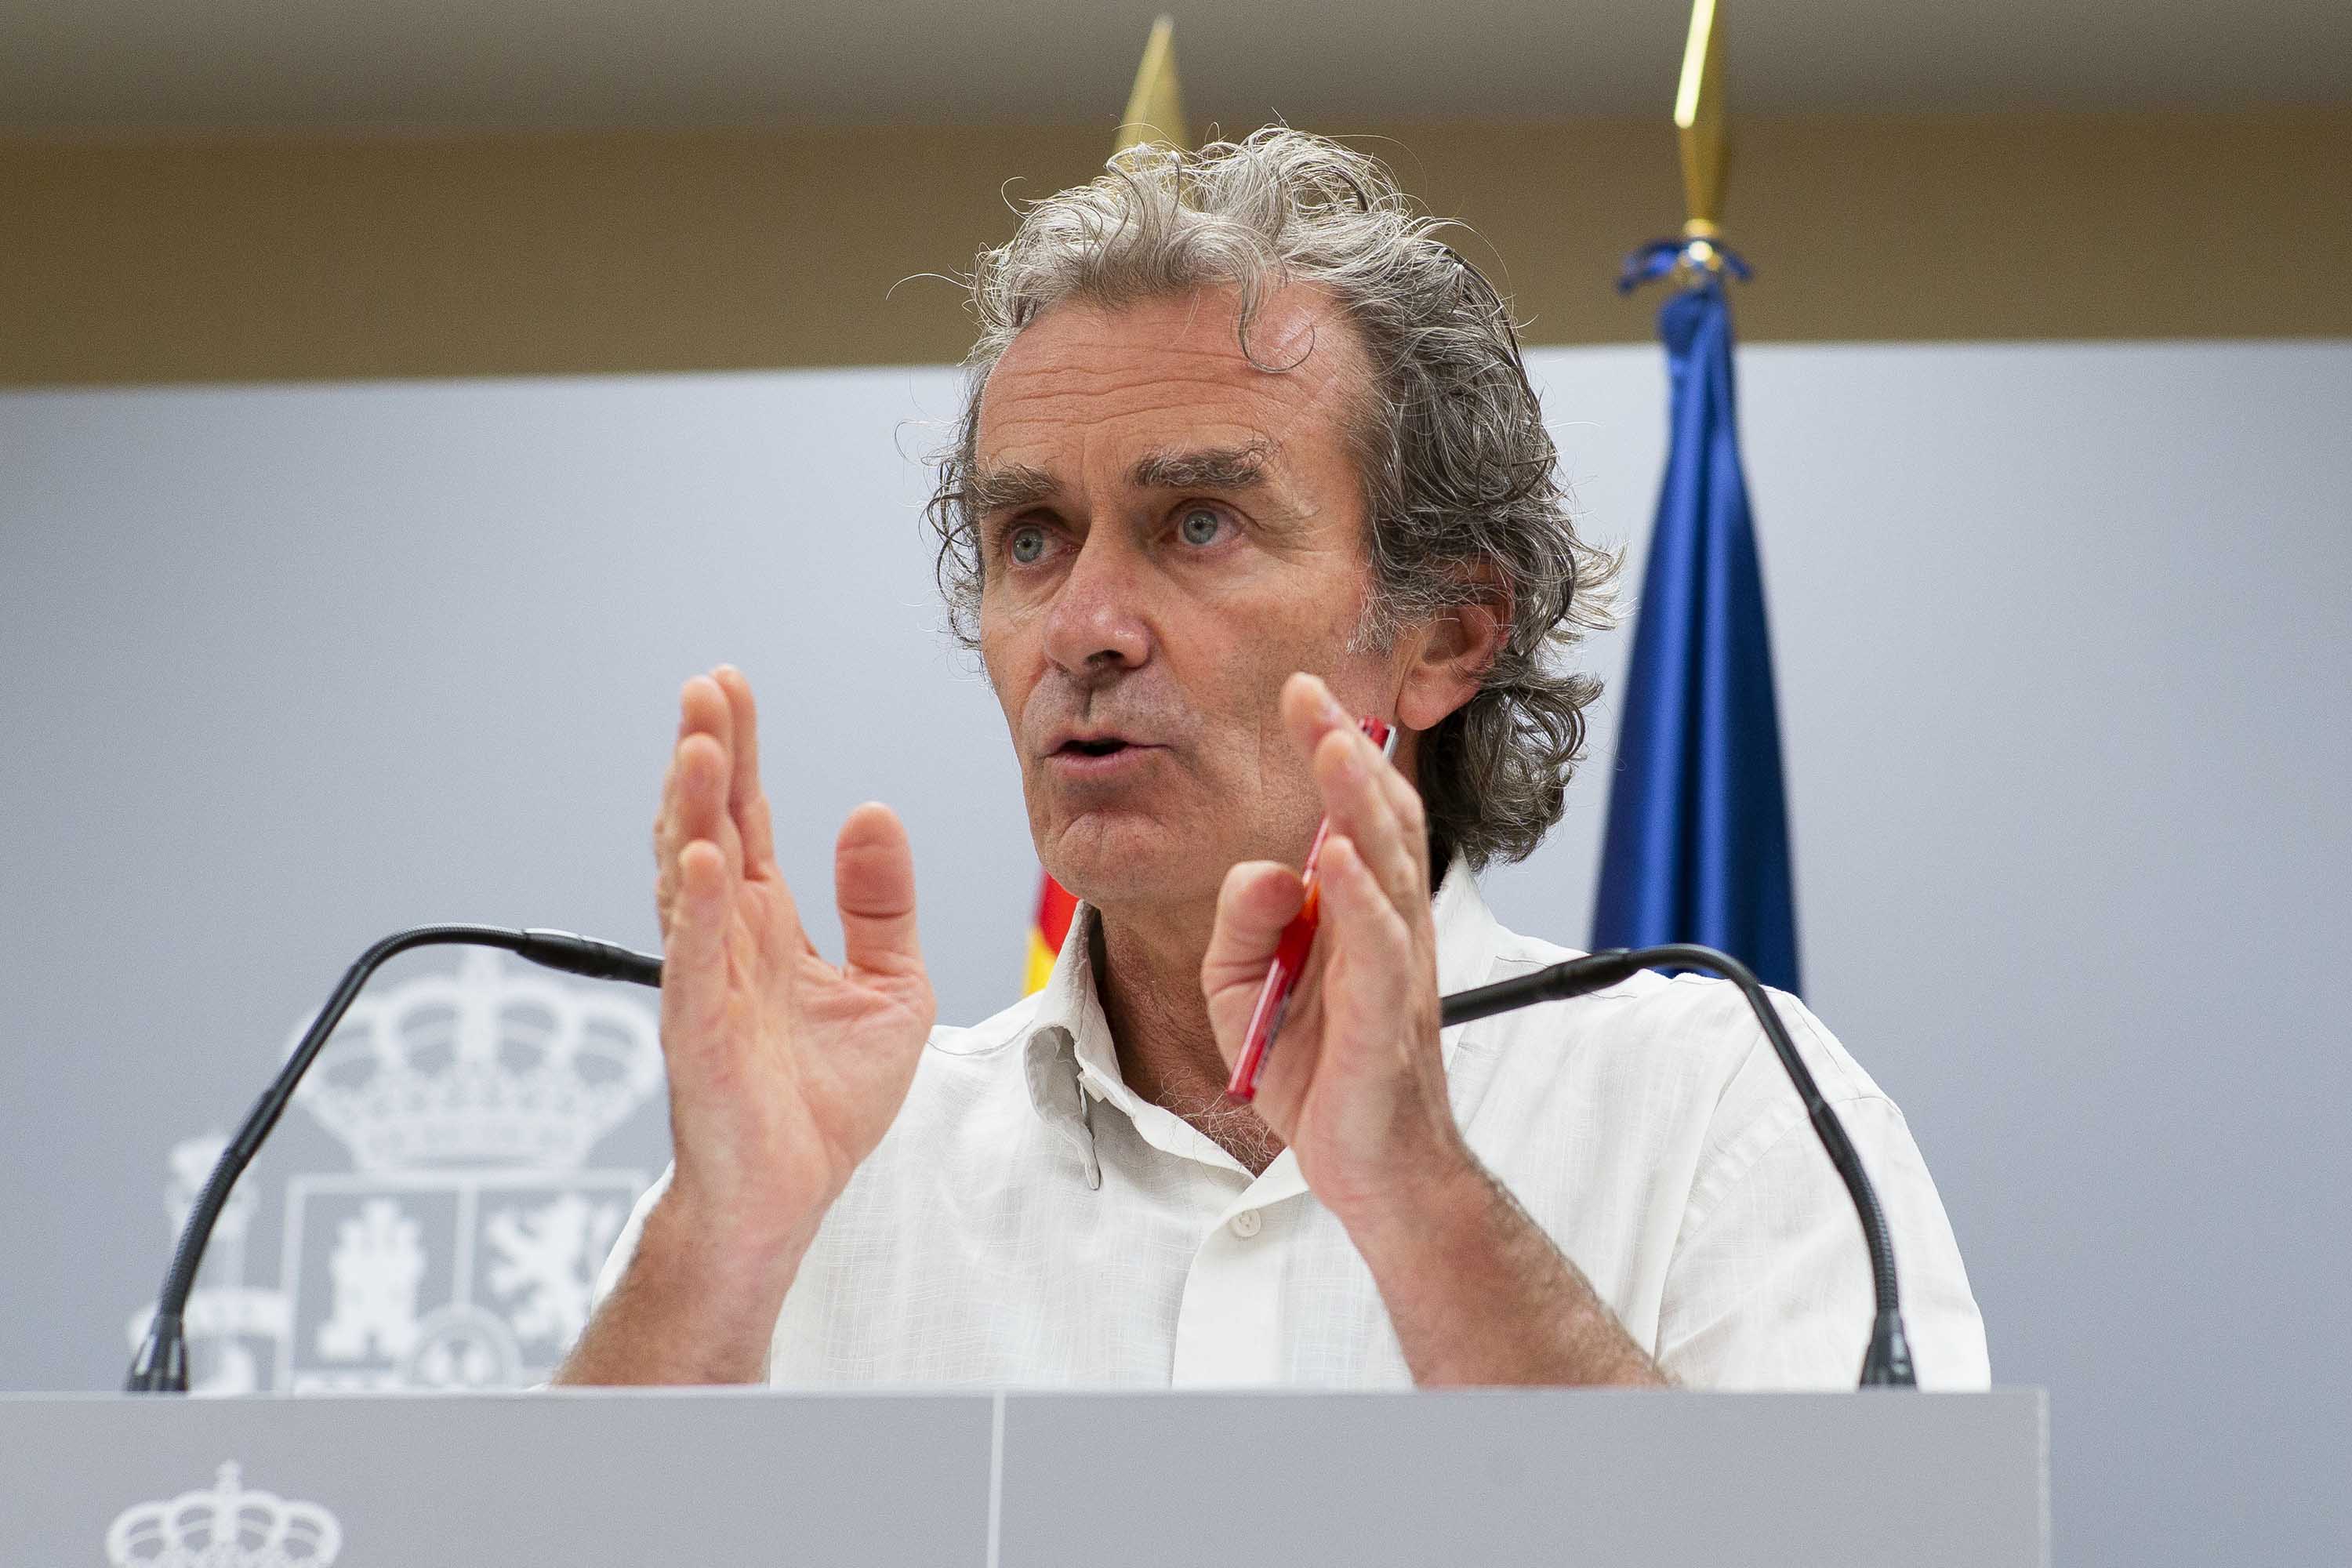 Fernando Simon holds a press conference about the pandemic at the Ministry of Health in Madrid, Spain, on August 20.